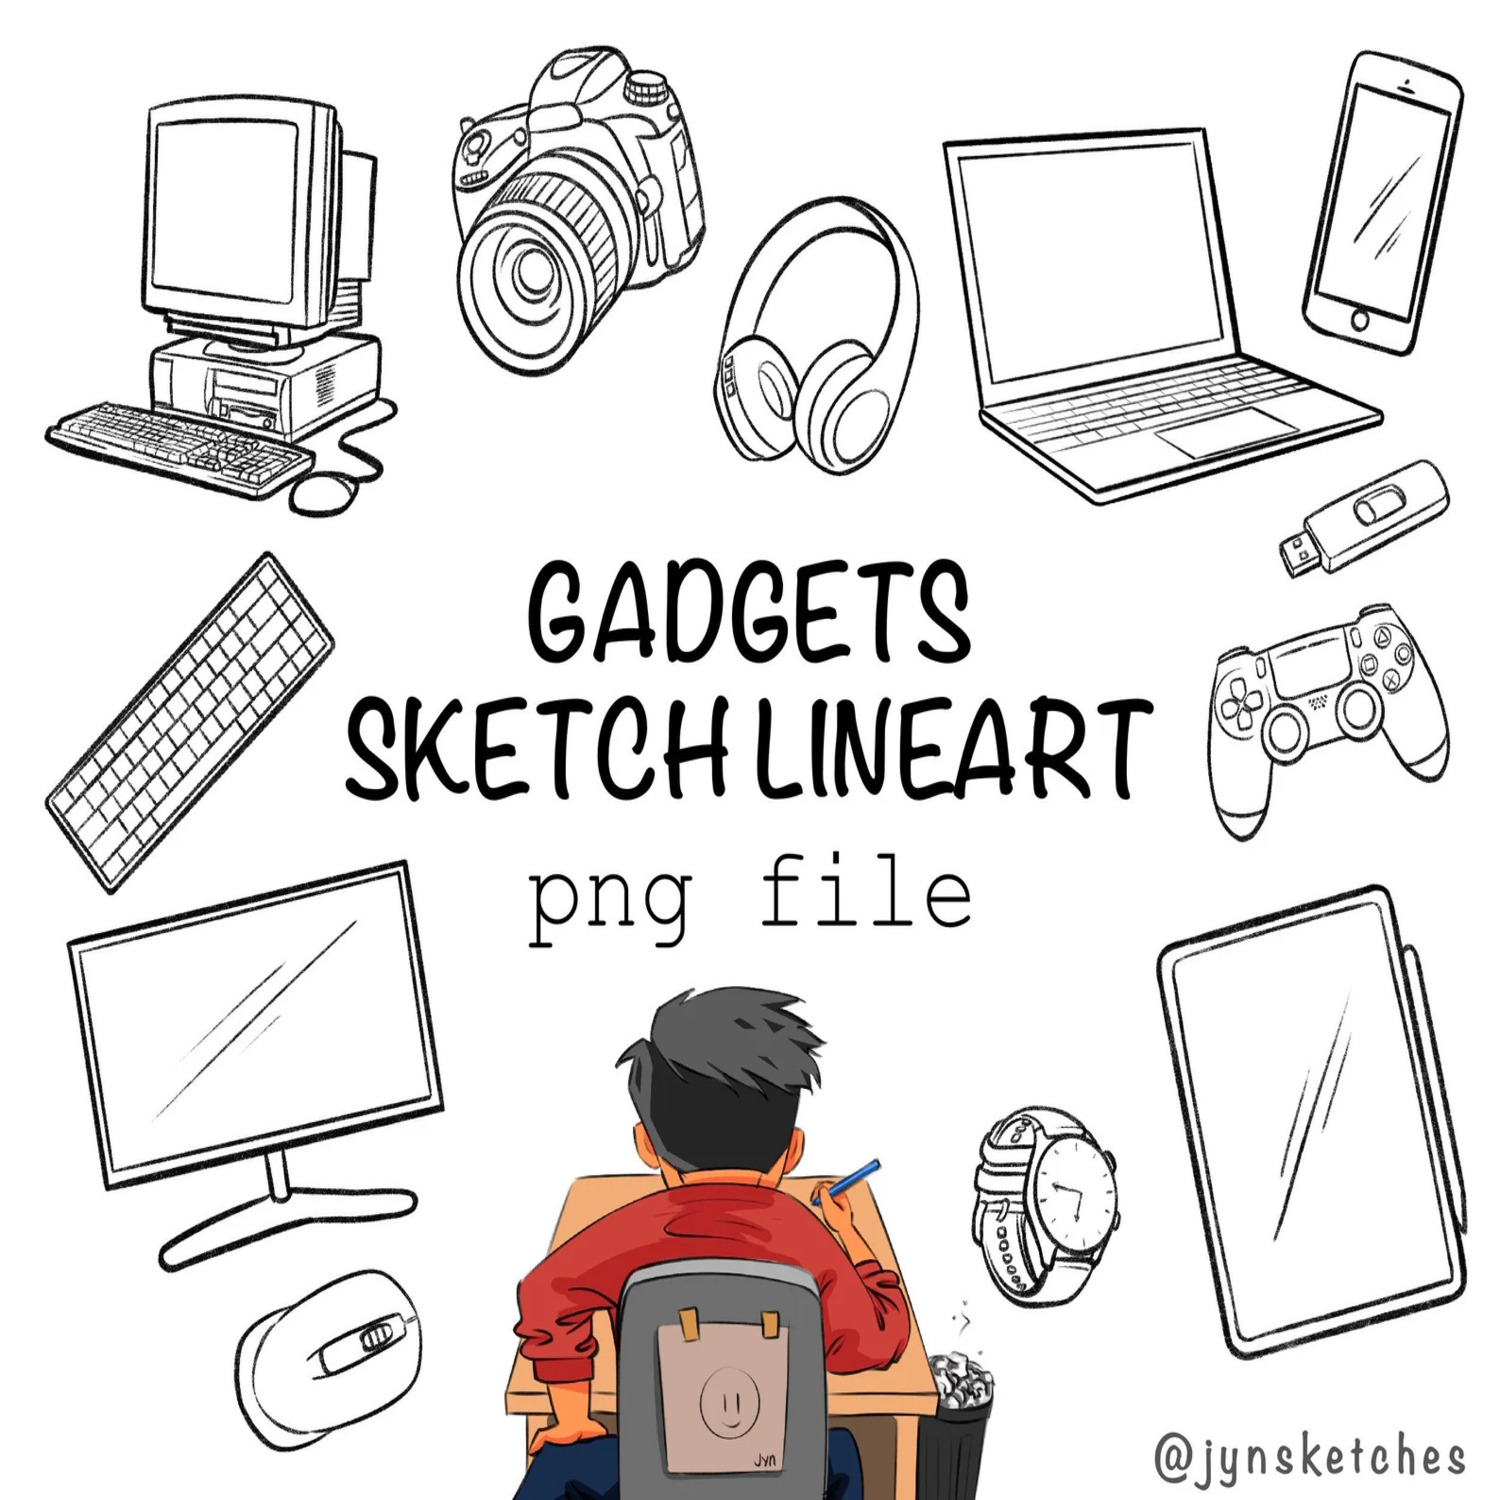 Gadgets, Devices, Computer, Technology, Hand Drawn Line art cover.